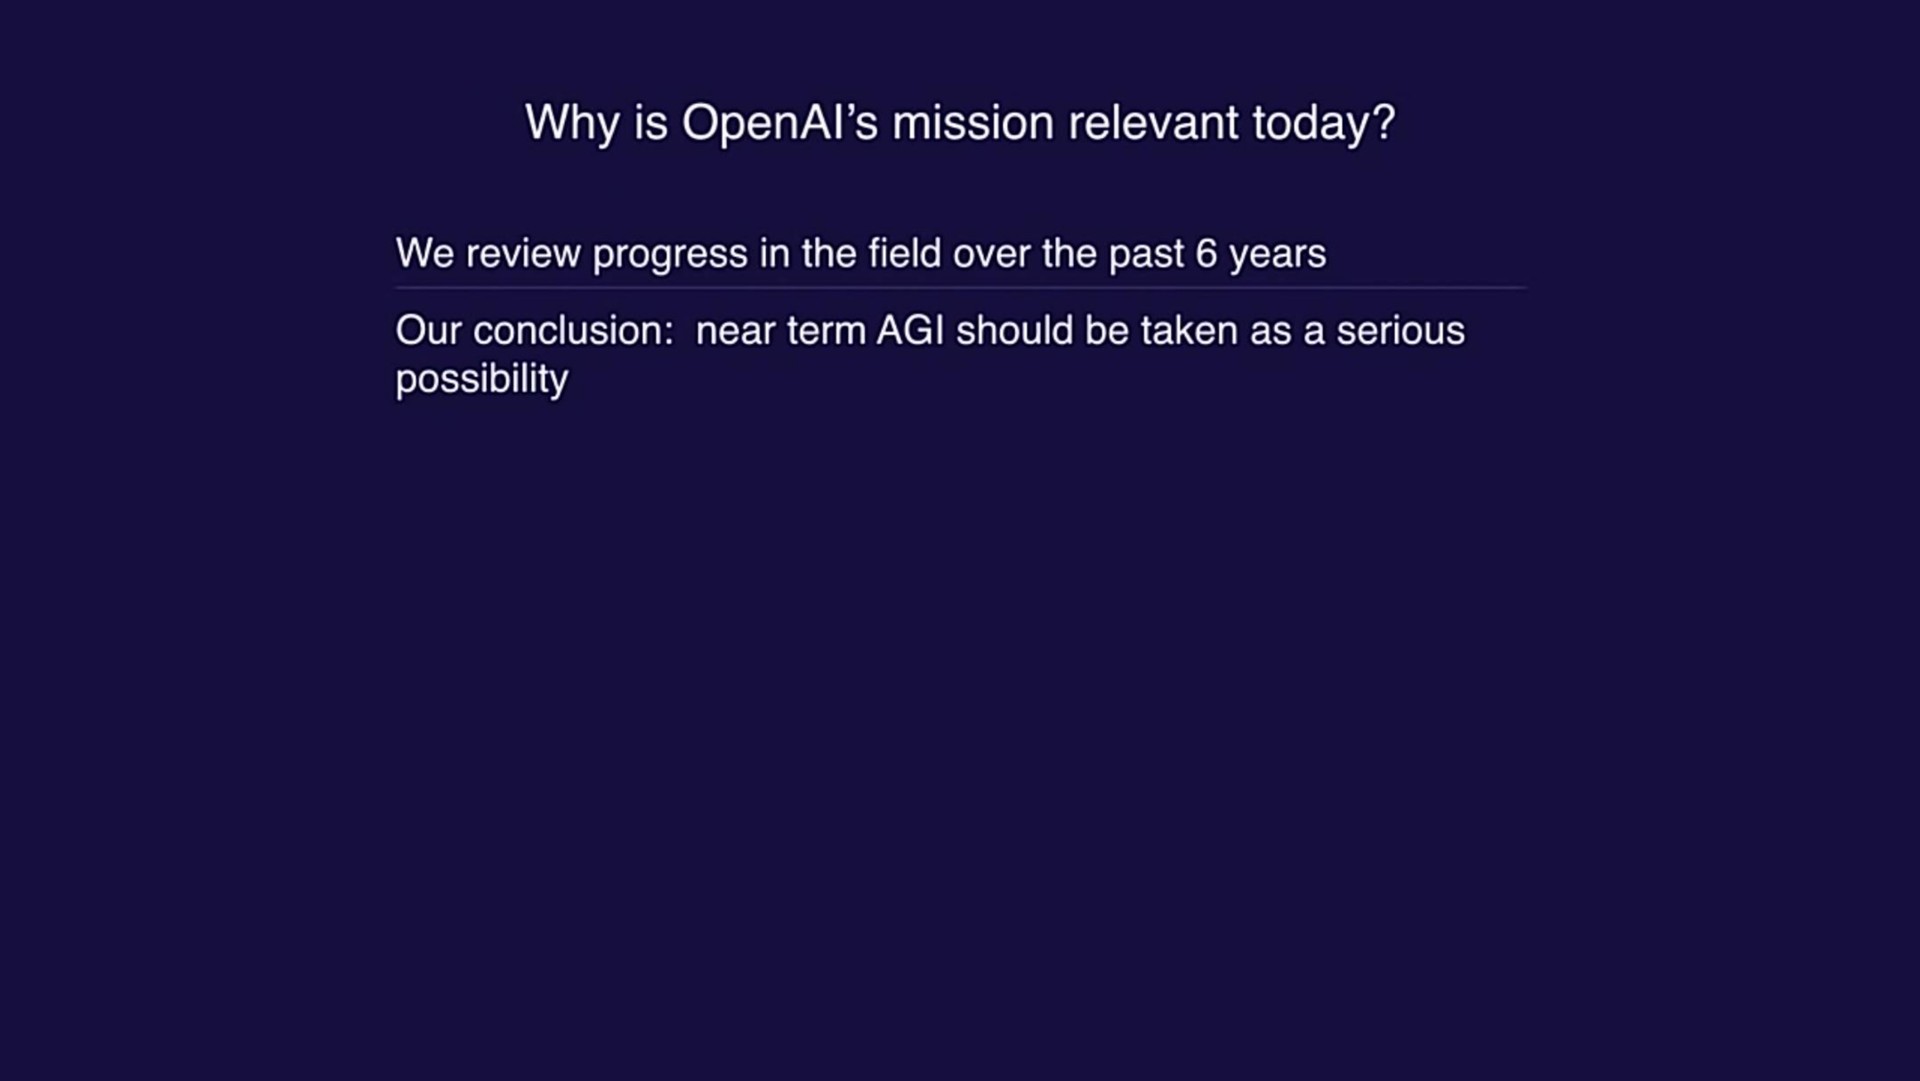 why is mission relevant today | OpenAI